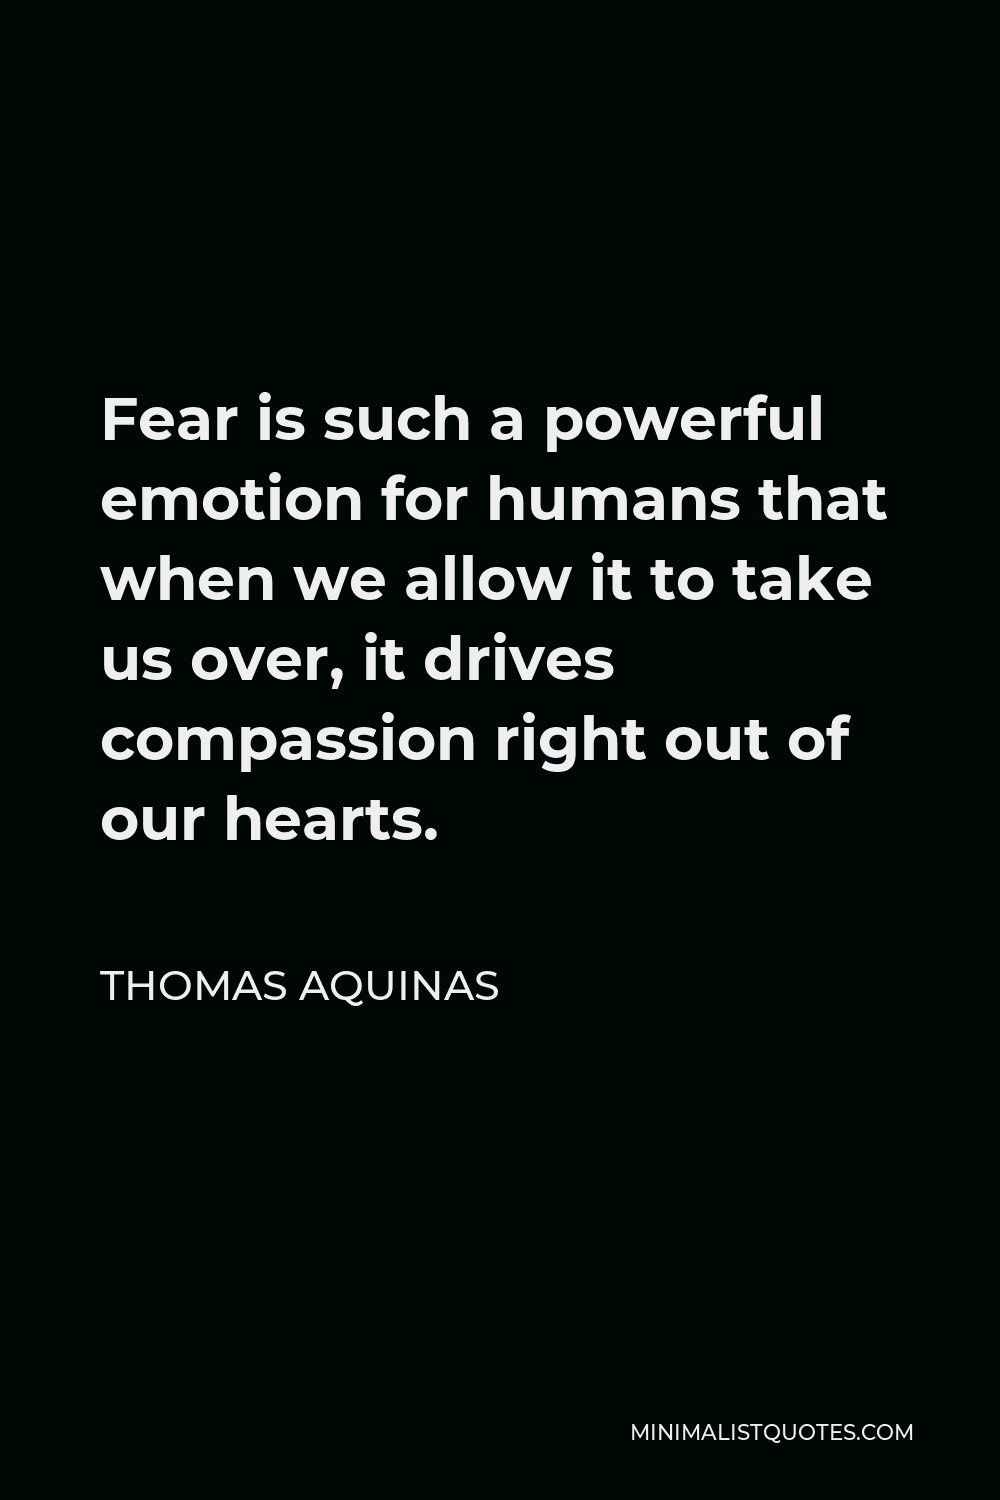 Thomas Aquinas quote: Fear is such a powerful emotion for humans that  when